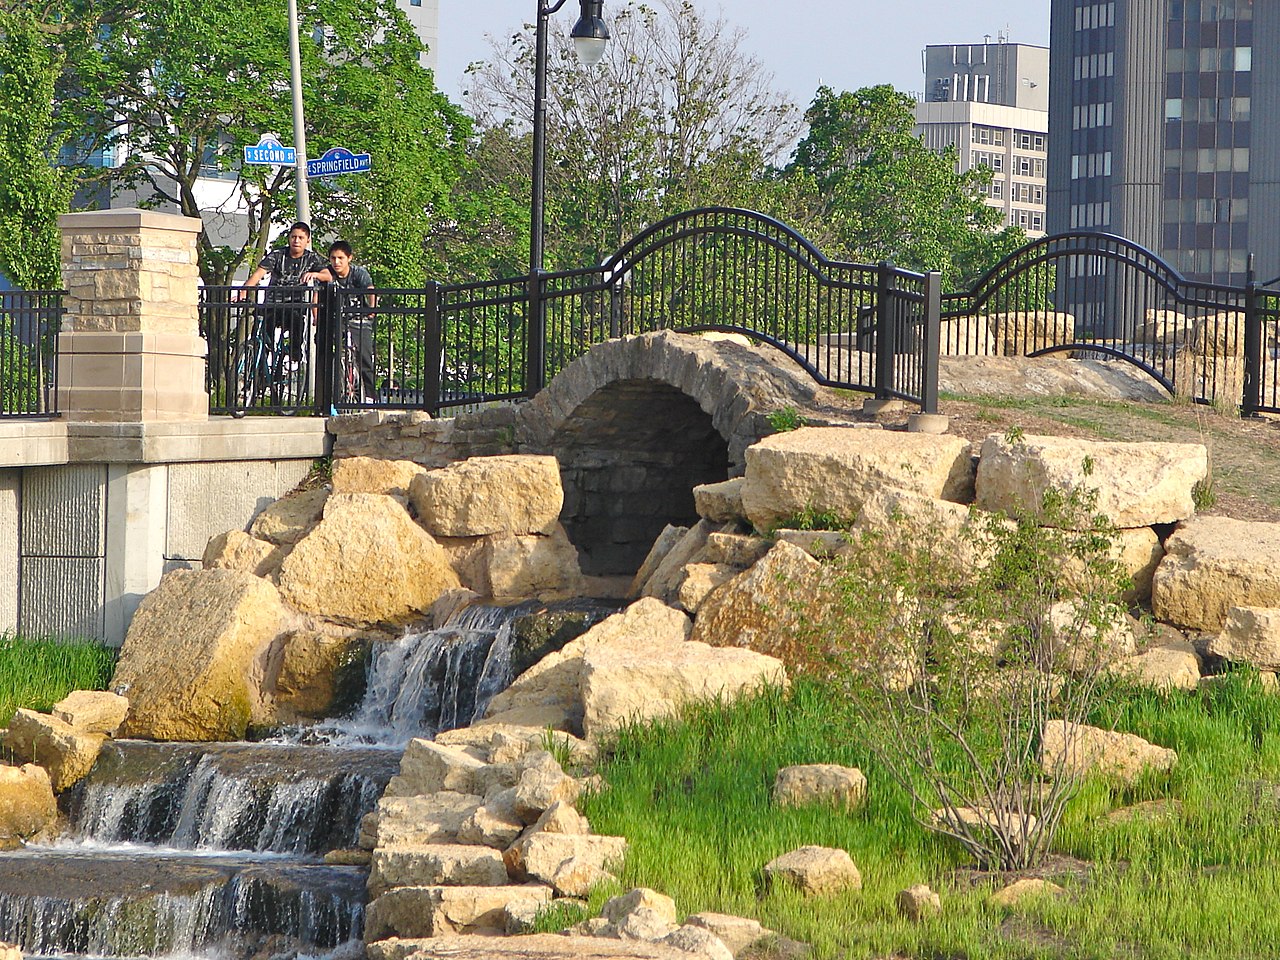 waterfall next to large rocks under a stone bridge with buildings in the background